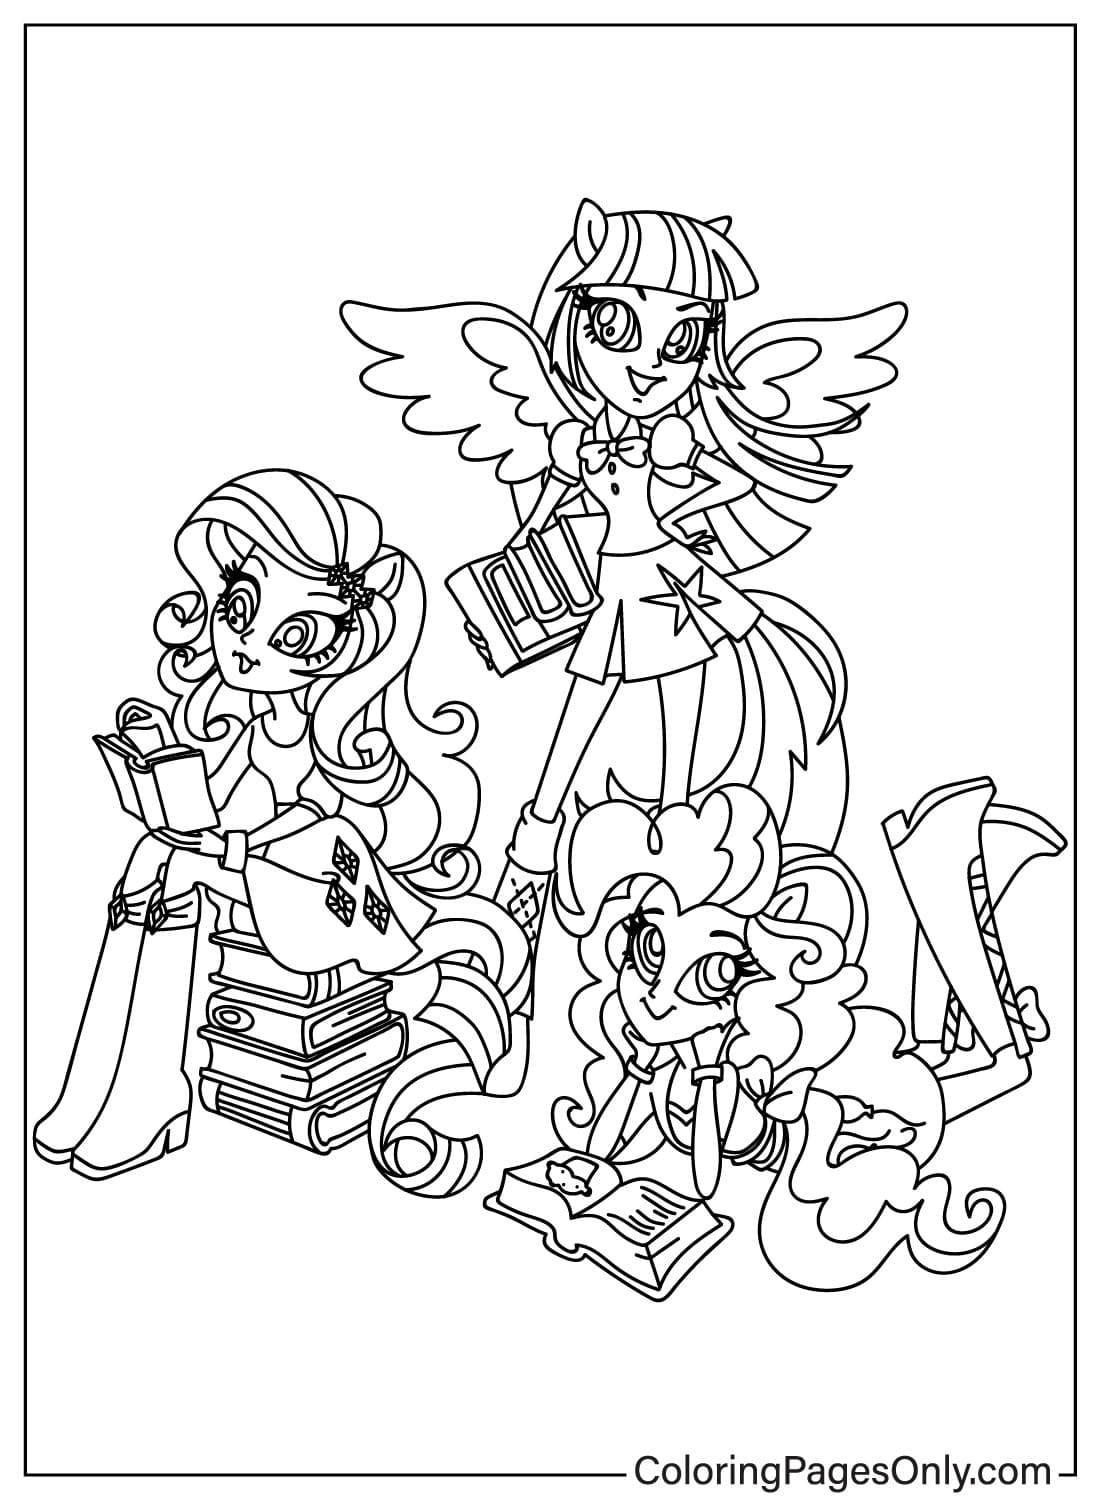 Equestria Girls Coloring Page Images